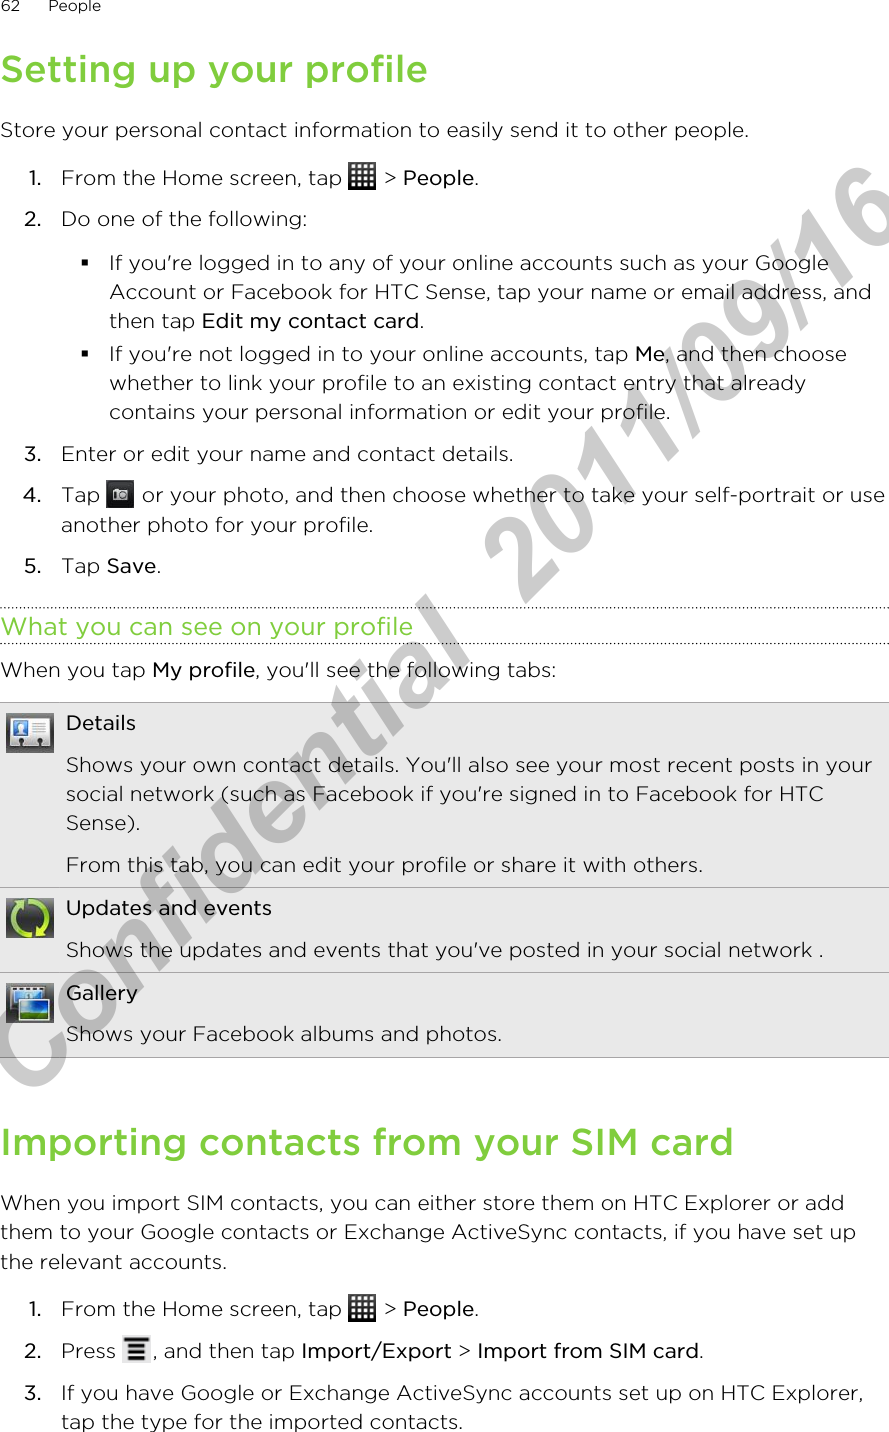 Setting up your profileStore your personal contact information to easily send it to other people.1. From the Home screen, tap   &gt; People.2. Do one of the following:§If you&apos;re logged in to any of your online accounts such as your GoogleAccount or Facebook for HTC Sense, tap your name or email address, andthen tap Edit my contact card.§If you&apos;re not logged in to your online accounts, tap Me, and then choosewhether to link your profile to an existing contact entry that alreadycontains your personal information or edit your profile.3. Enter or edit your name and contact details.4. Tap   or your photo, and then choose whether to take your self-portrait or useanother photo for your profile.5. Tap Save.What you can see on your profileWhen you tap My profile, you&apos;ll see the following tabs:DetailsShows your own contact details. You&apos;ll also see your most recent posts in yoursocial network (such as Facebook if you&apos;re signed in to Facebook for HTCSense).From this tab, you can edit your profile or share it with others.Updates and eventsShows the updates and events that you&apos;ve posted in your social network .GalleryShows your Facebook albums and photos.Importing contacts from your SIM cardWhen you import SIM contacts, you can either store them on HTC Explorer or addthem to your Google contacts or Exchange ActiveSync contacts, if you have set upthe relevant accounts.1. From the Home screen, tap   &gt; People.2. Press  , and then tap Import/Export &gt; Import from SIM card.3. If you have Google or Exchange ActiveSync accounts set up on HTC Explorer,tap the type for the imported contacts.62 PeopleHTC Confidential  2011/09/16 